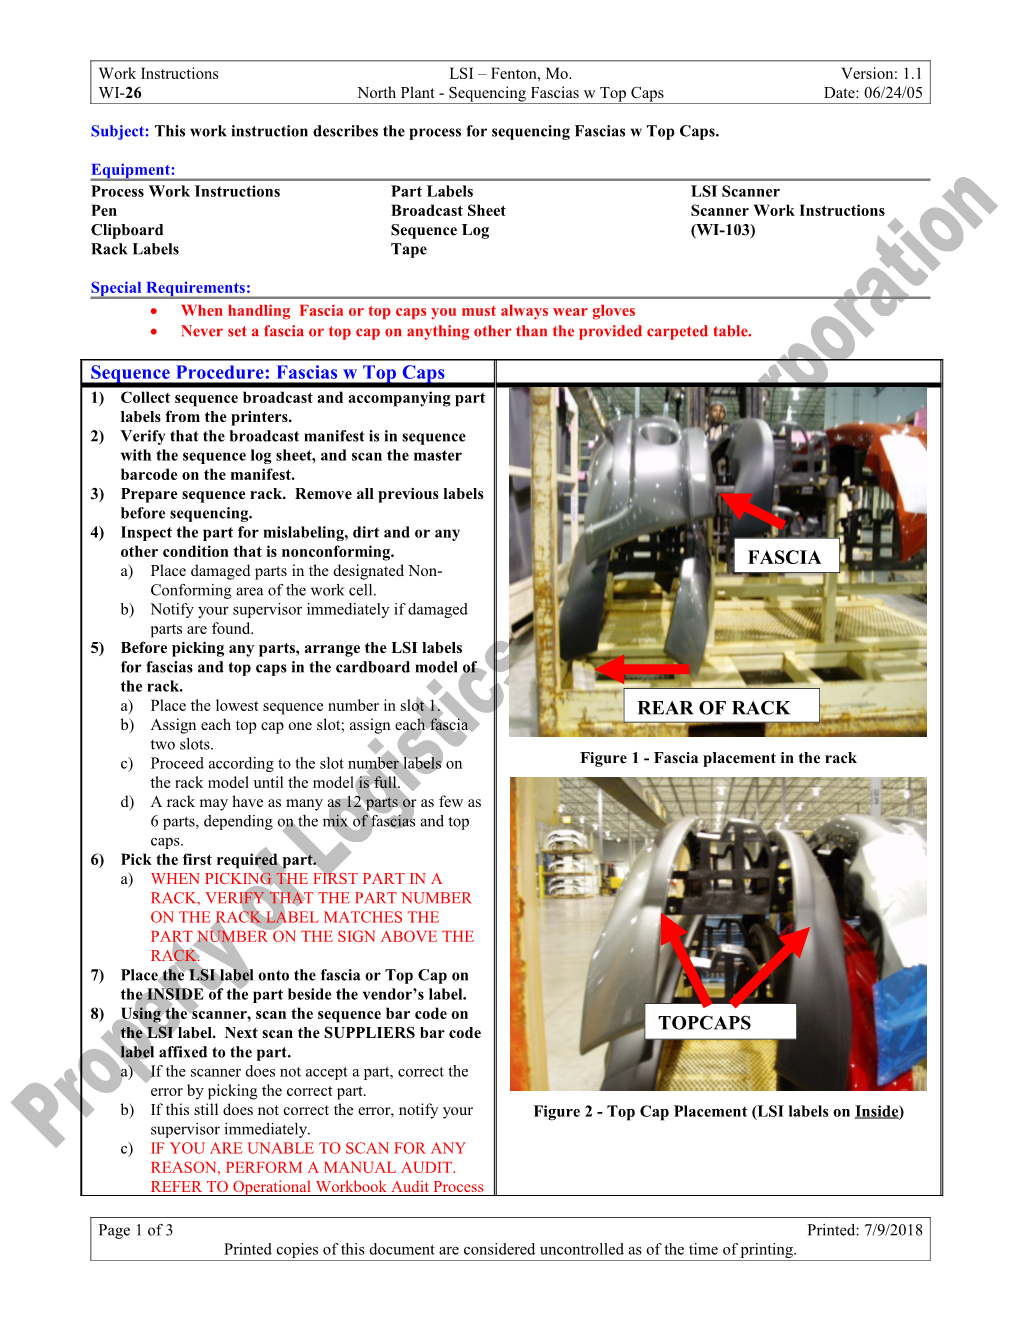 Subject: This Work Instruction Describes the Process for Sequencing Load Floors